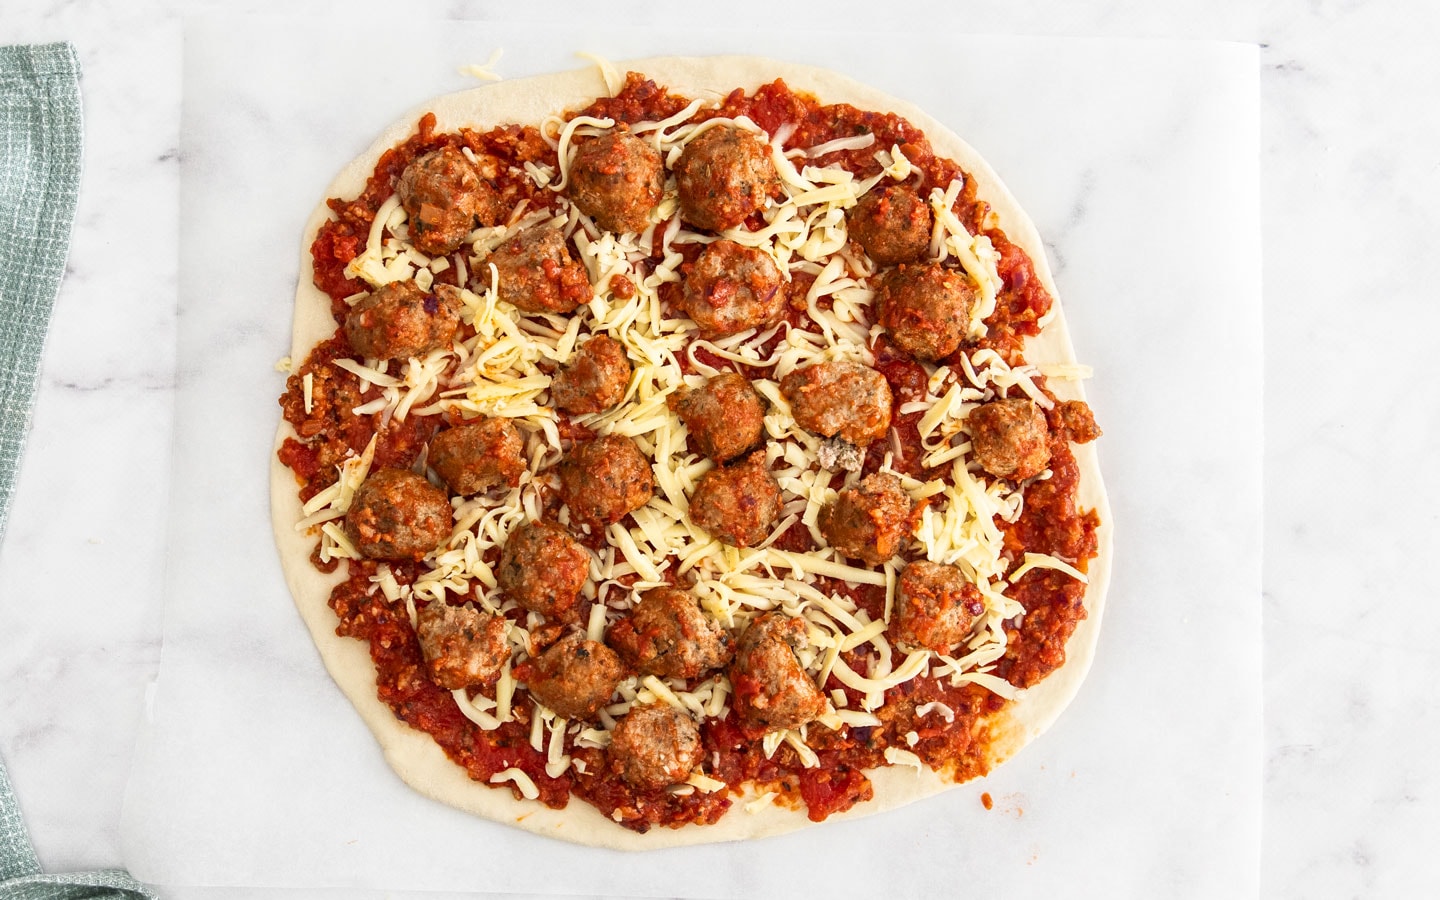 The pizza base topped with sauce, cheese and meatballs.